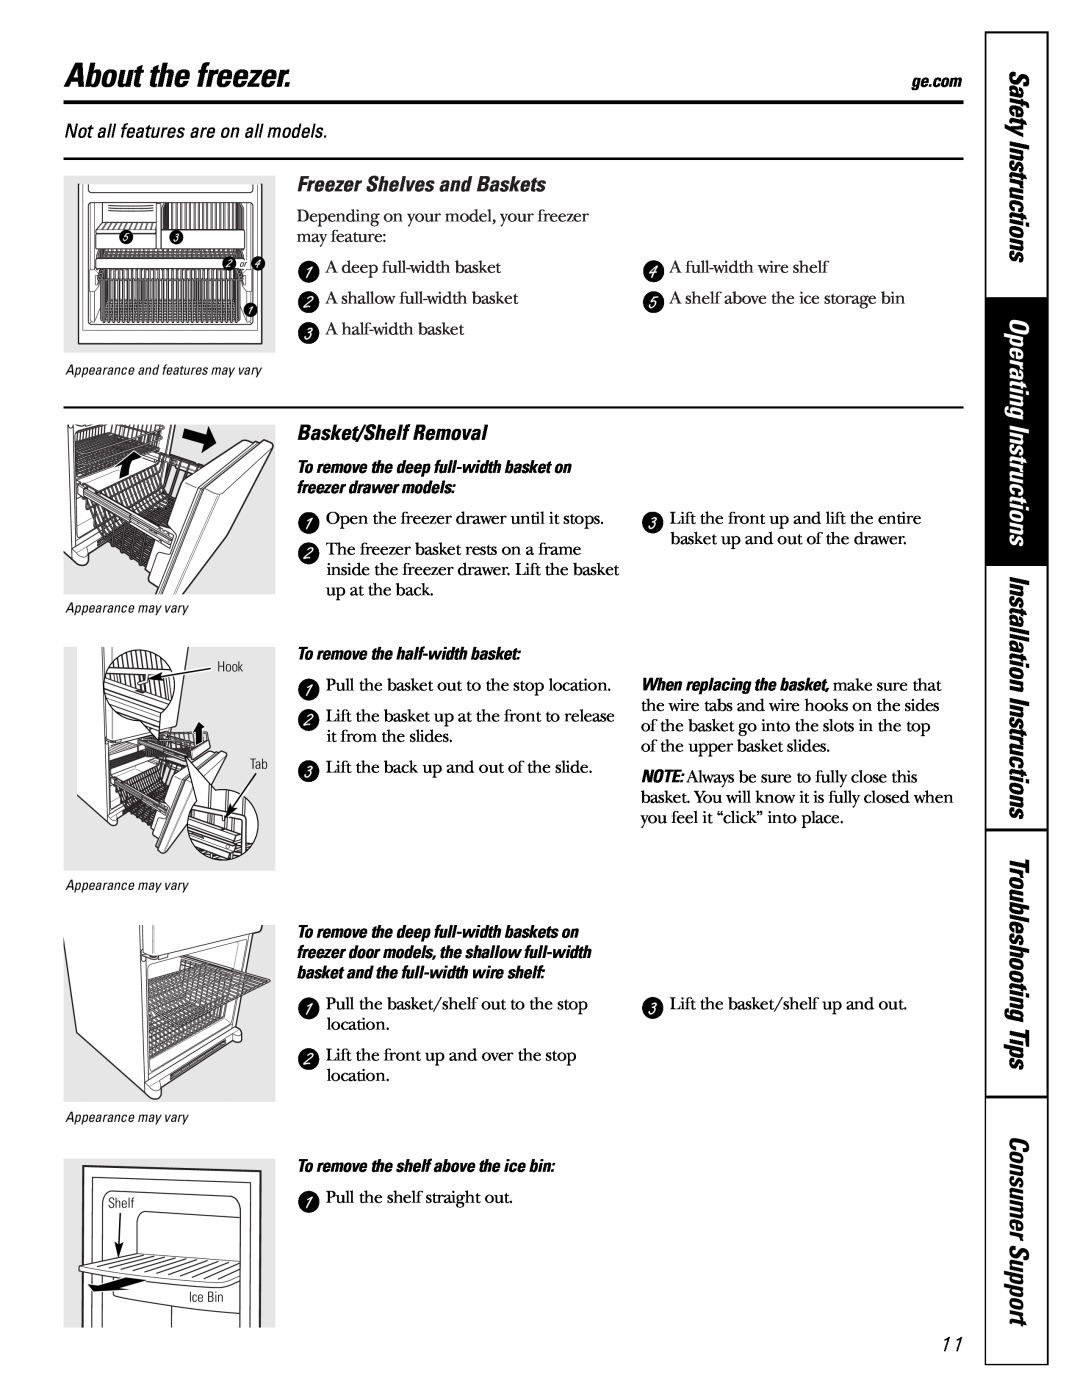 GE GDL22KCWSS manual About the freezer, Instructions Operating, Freezer Shelves and Baskets, Basket/Shelf Removal, Safety 